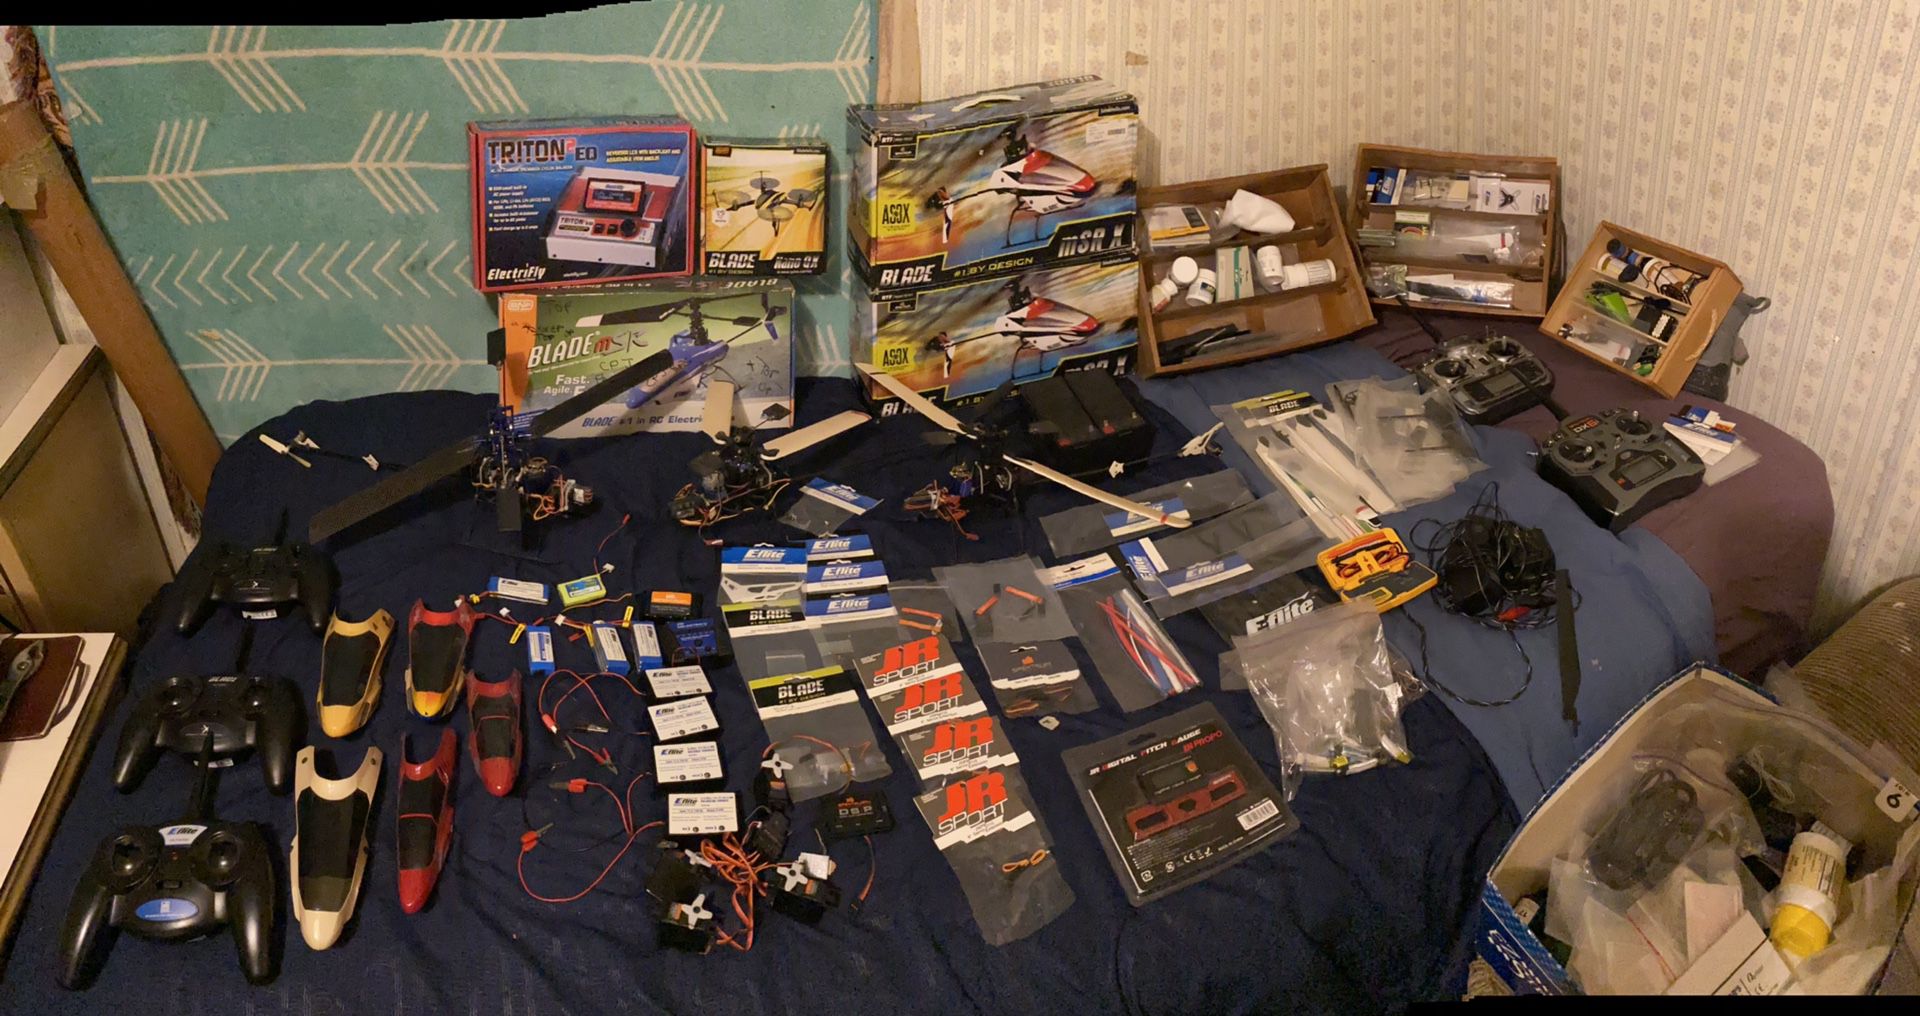 Rc helicopters Dx6i And Dx7 Receivers and tons of Parts